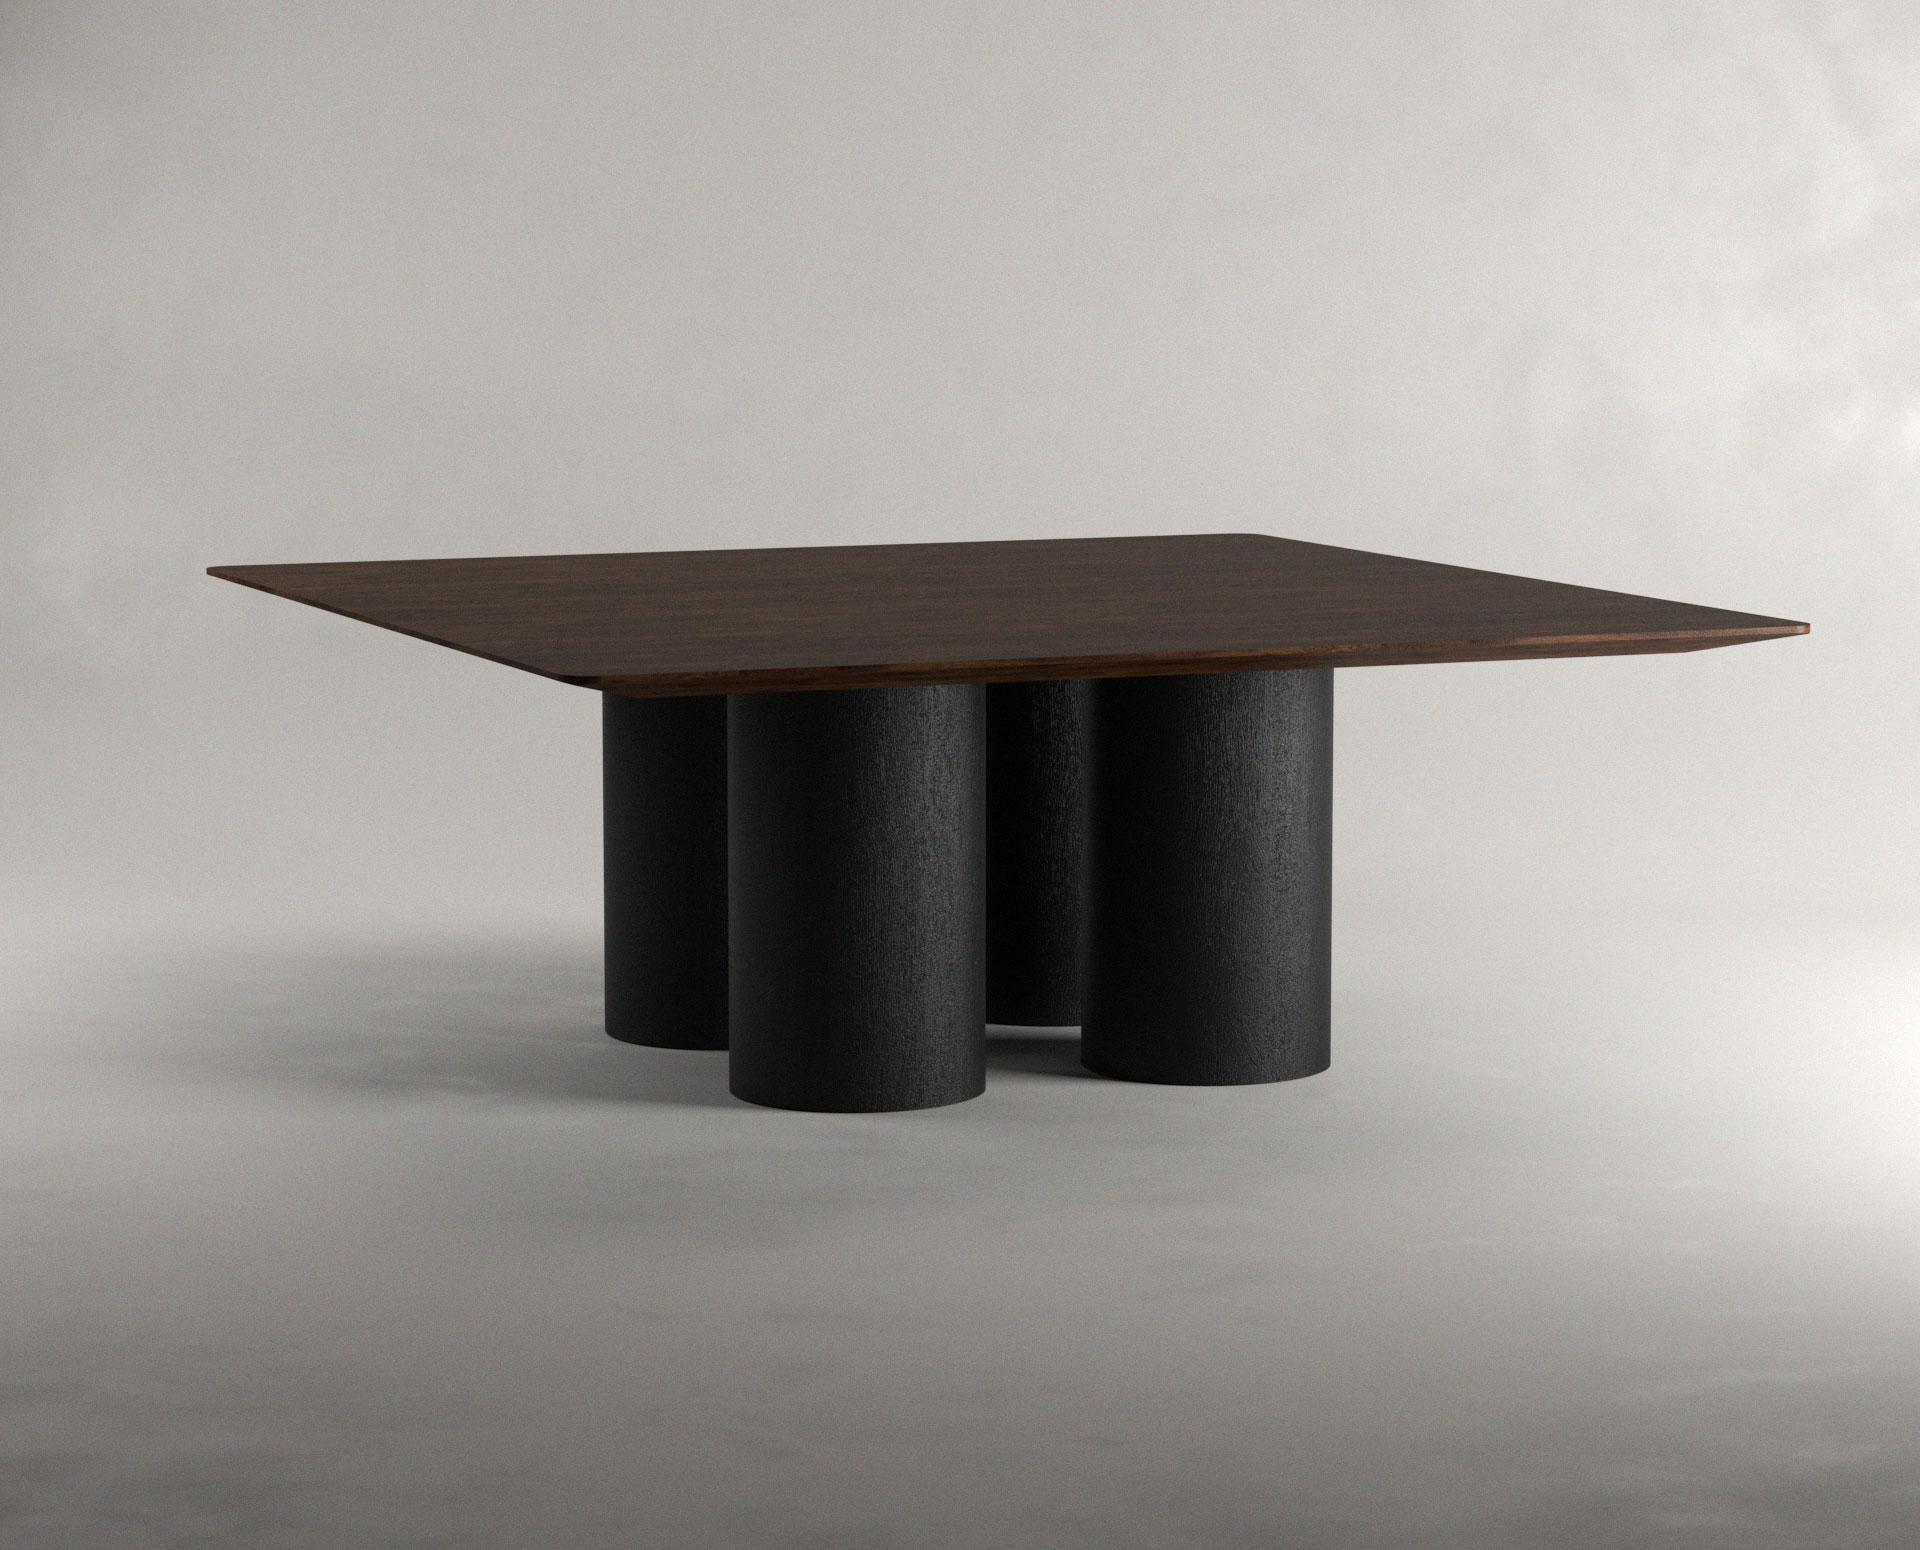 Pier square dining table by Siete Studio.
Dimensions: D200 x W200 x H73 cm.
Materials: walnut and black oak.

Please note as this product is handmade, colors and dimensions may vary to those shown in images. 

Siete is a design studio based in